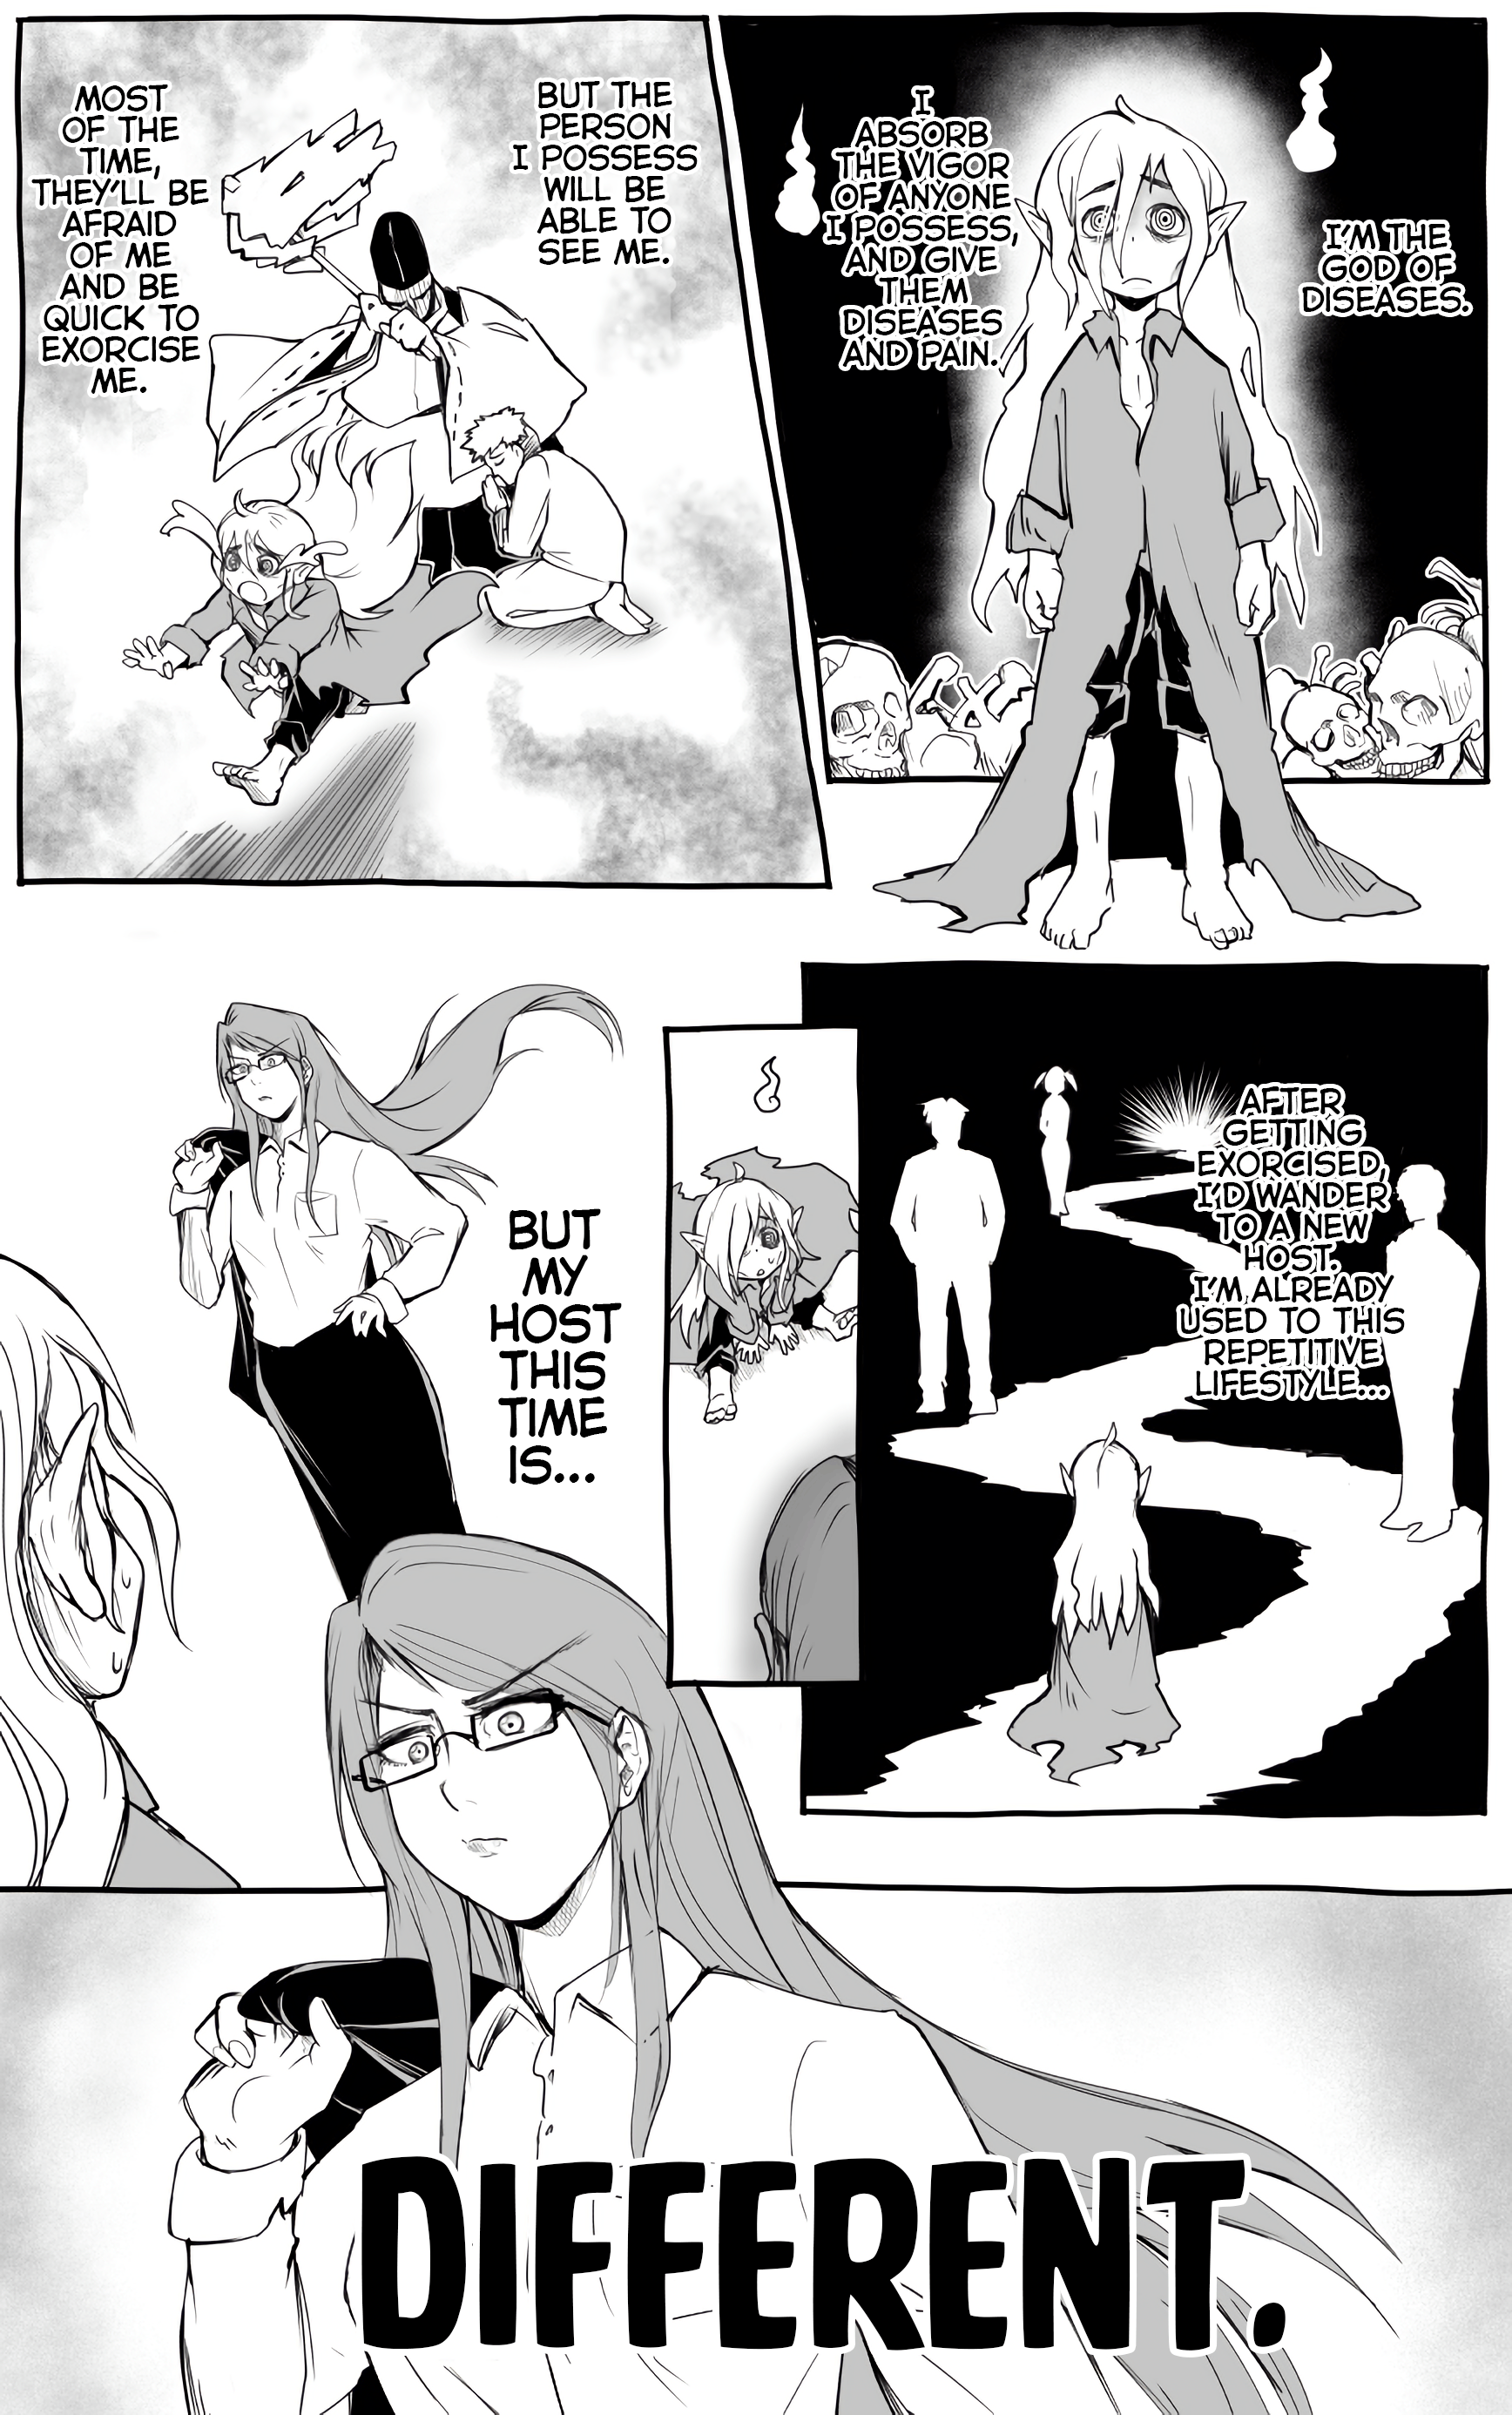 The Lady Possessed by the God of Diseases manga